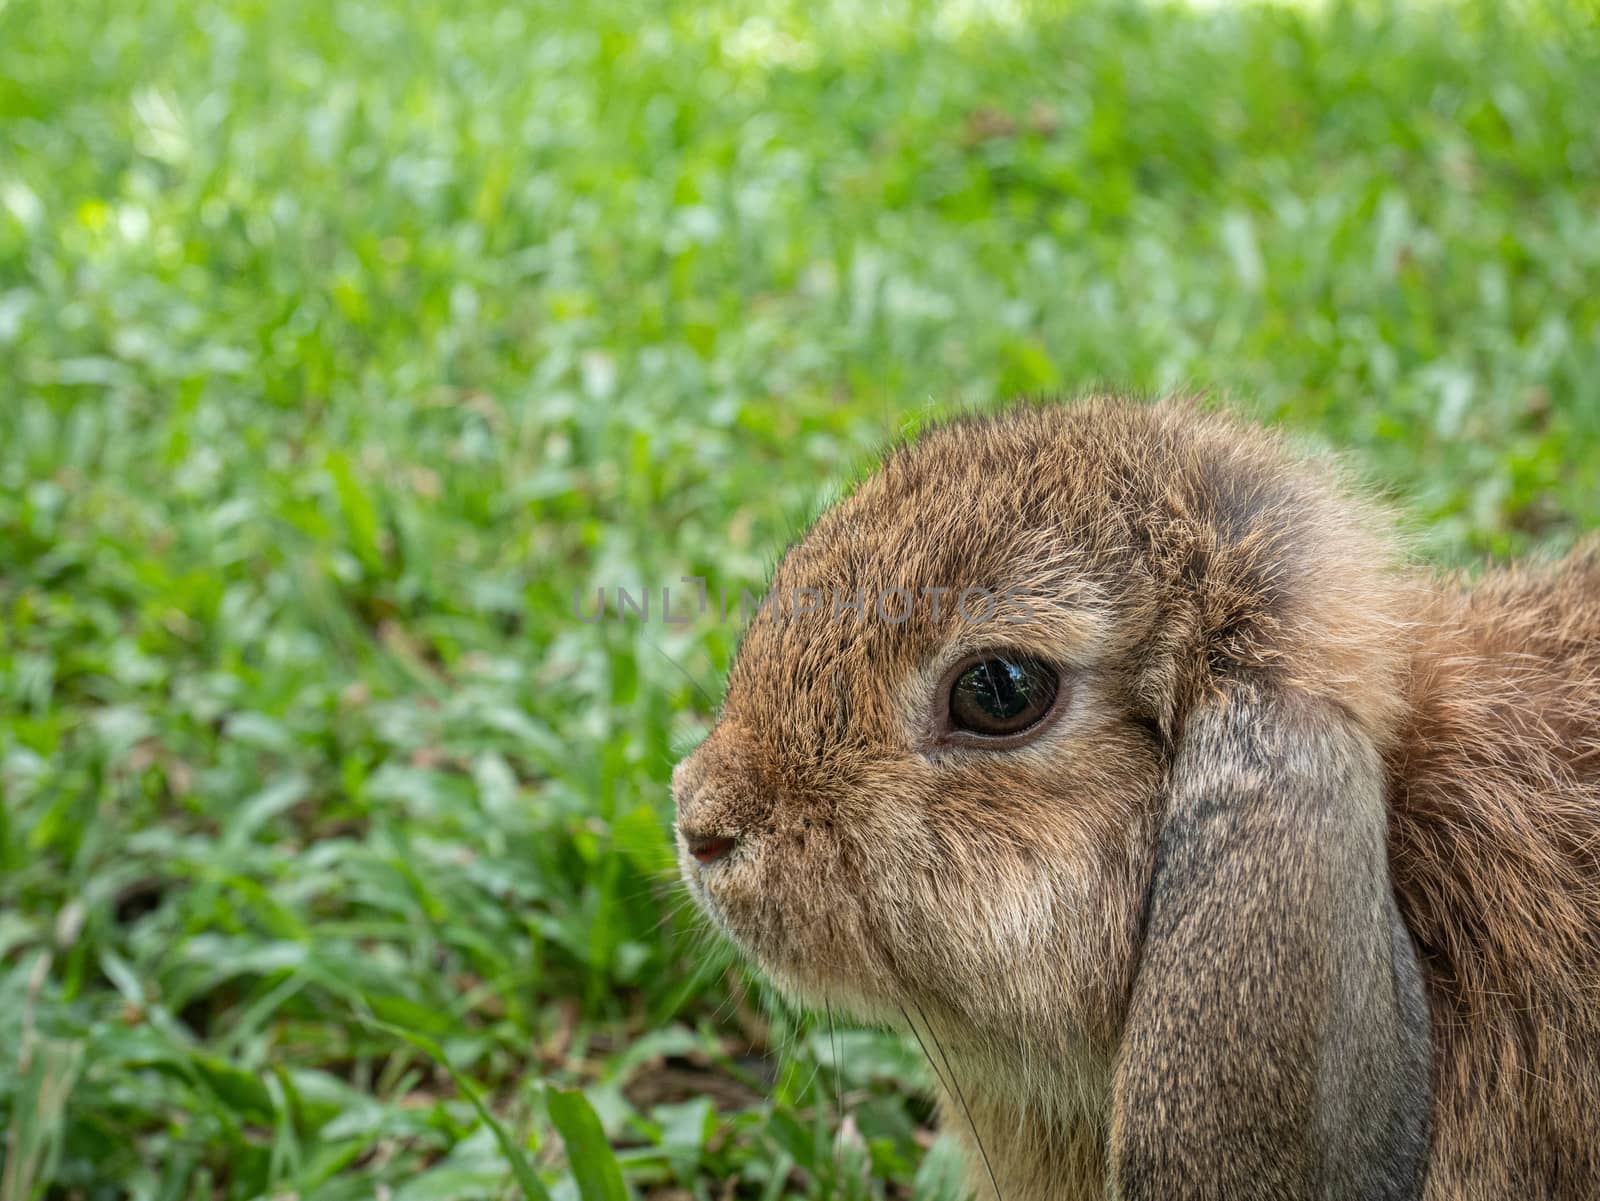 Cute little rabbit sitting on green grass in summer day. Easter day concept idea.